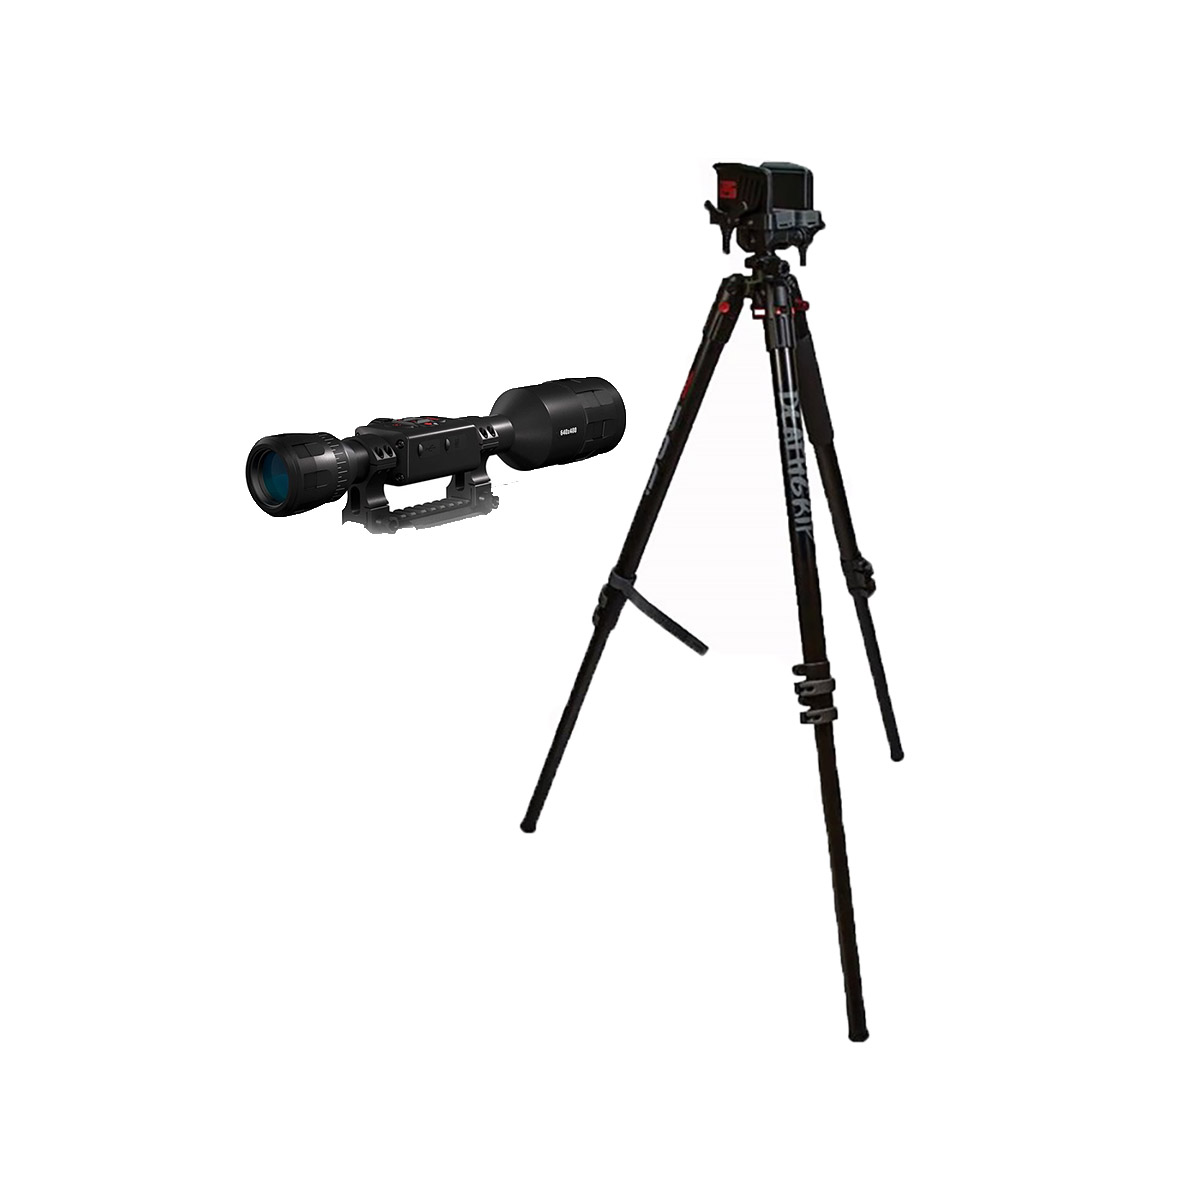 BROWNELLS - 4.5-18X THOR 4 384X288 THERMAL SCOPE WITH DEATHGRIP TRIPOD